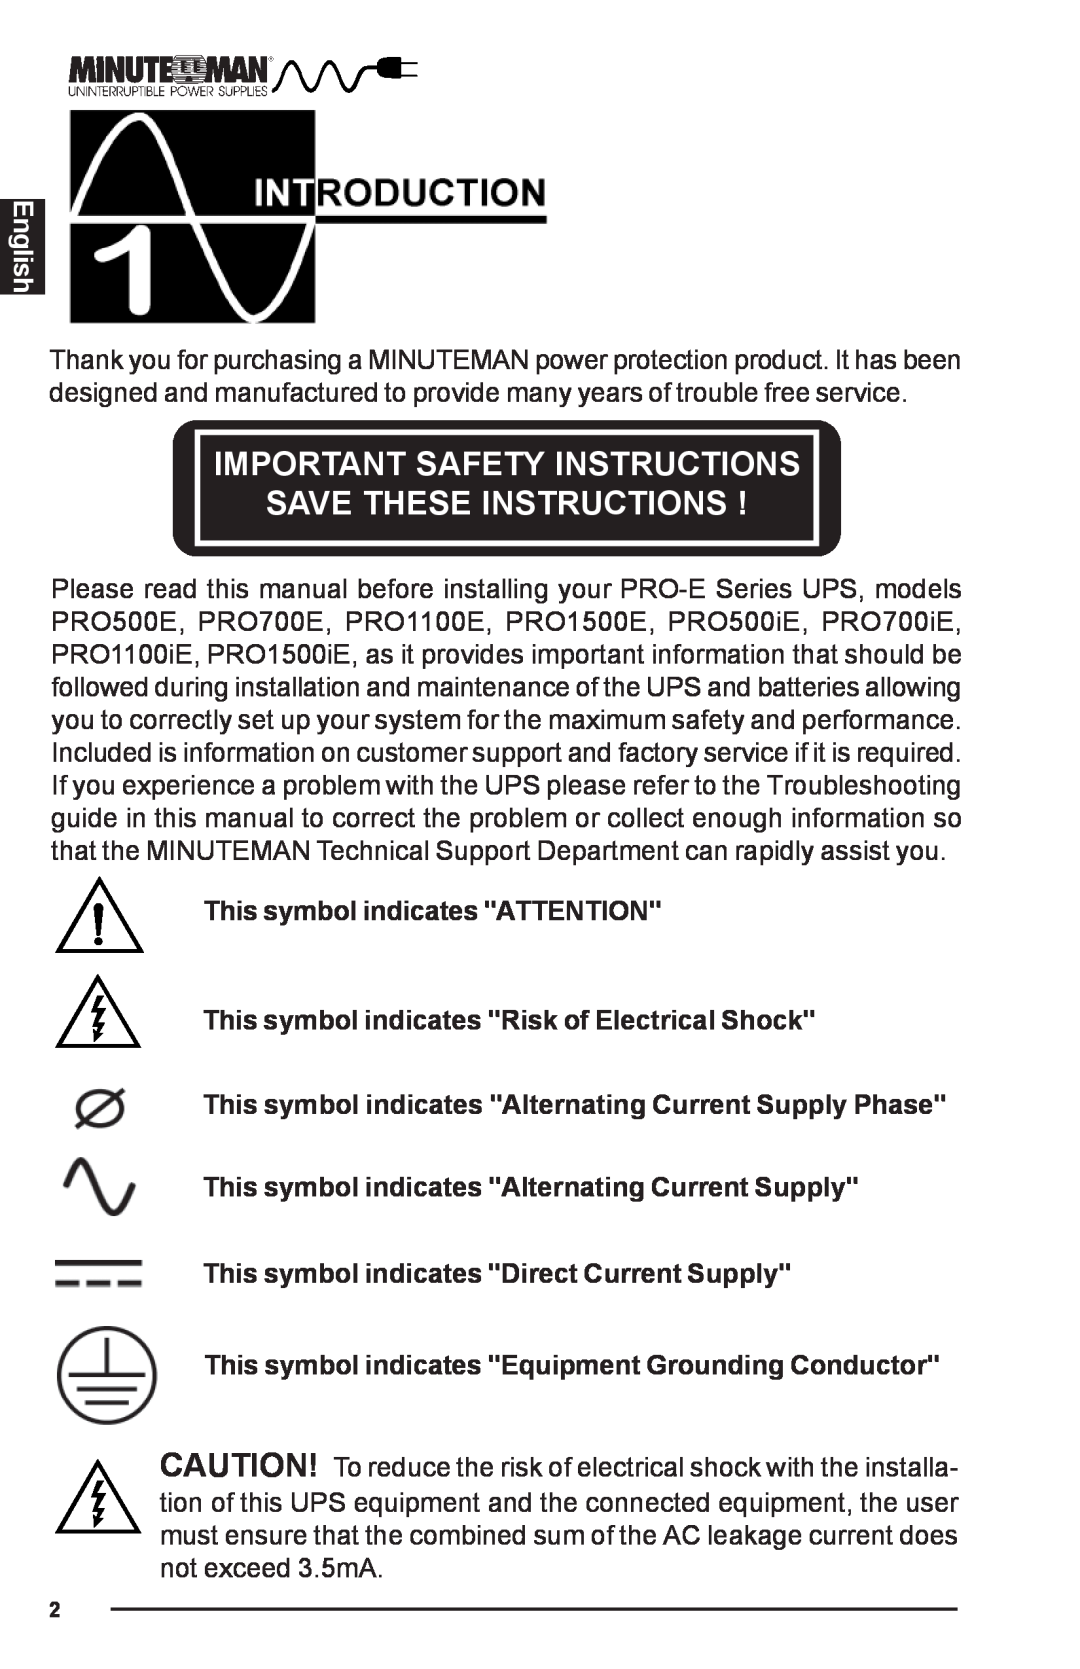 Minuteman UPS PRO-E Important Safety Instructions Save These Instructions, English, This symbol indicates ATTENTION 